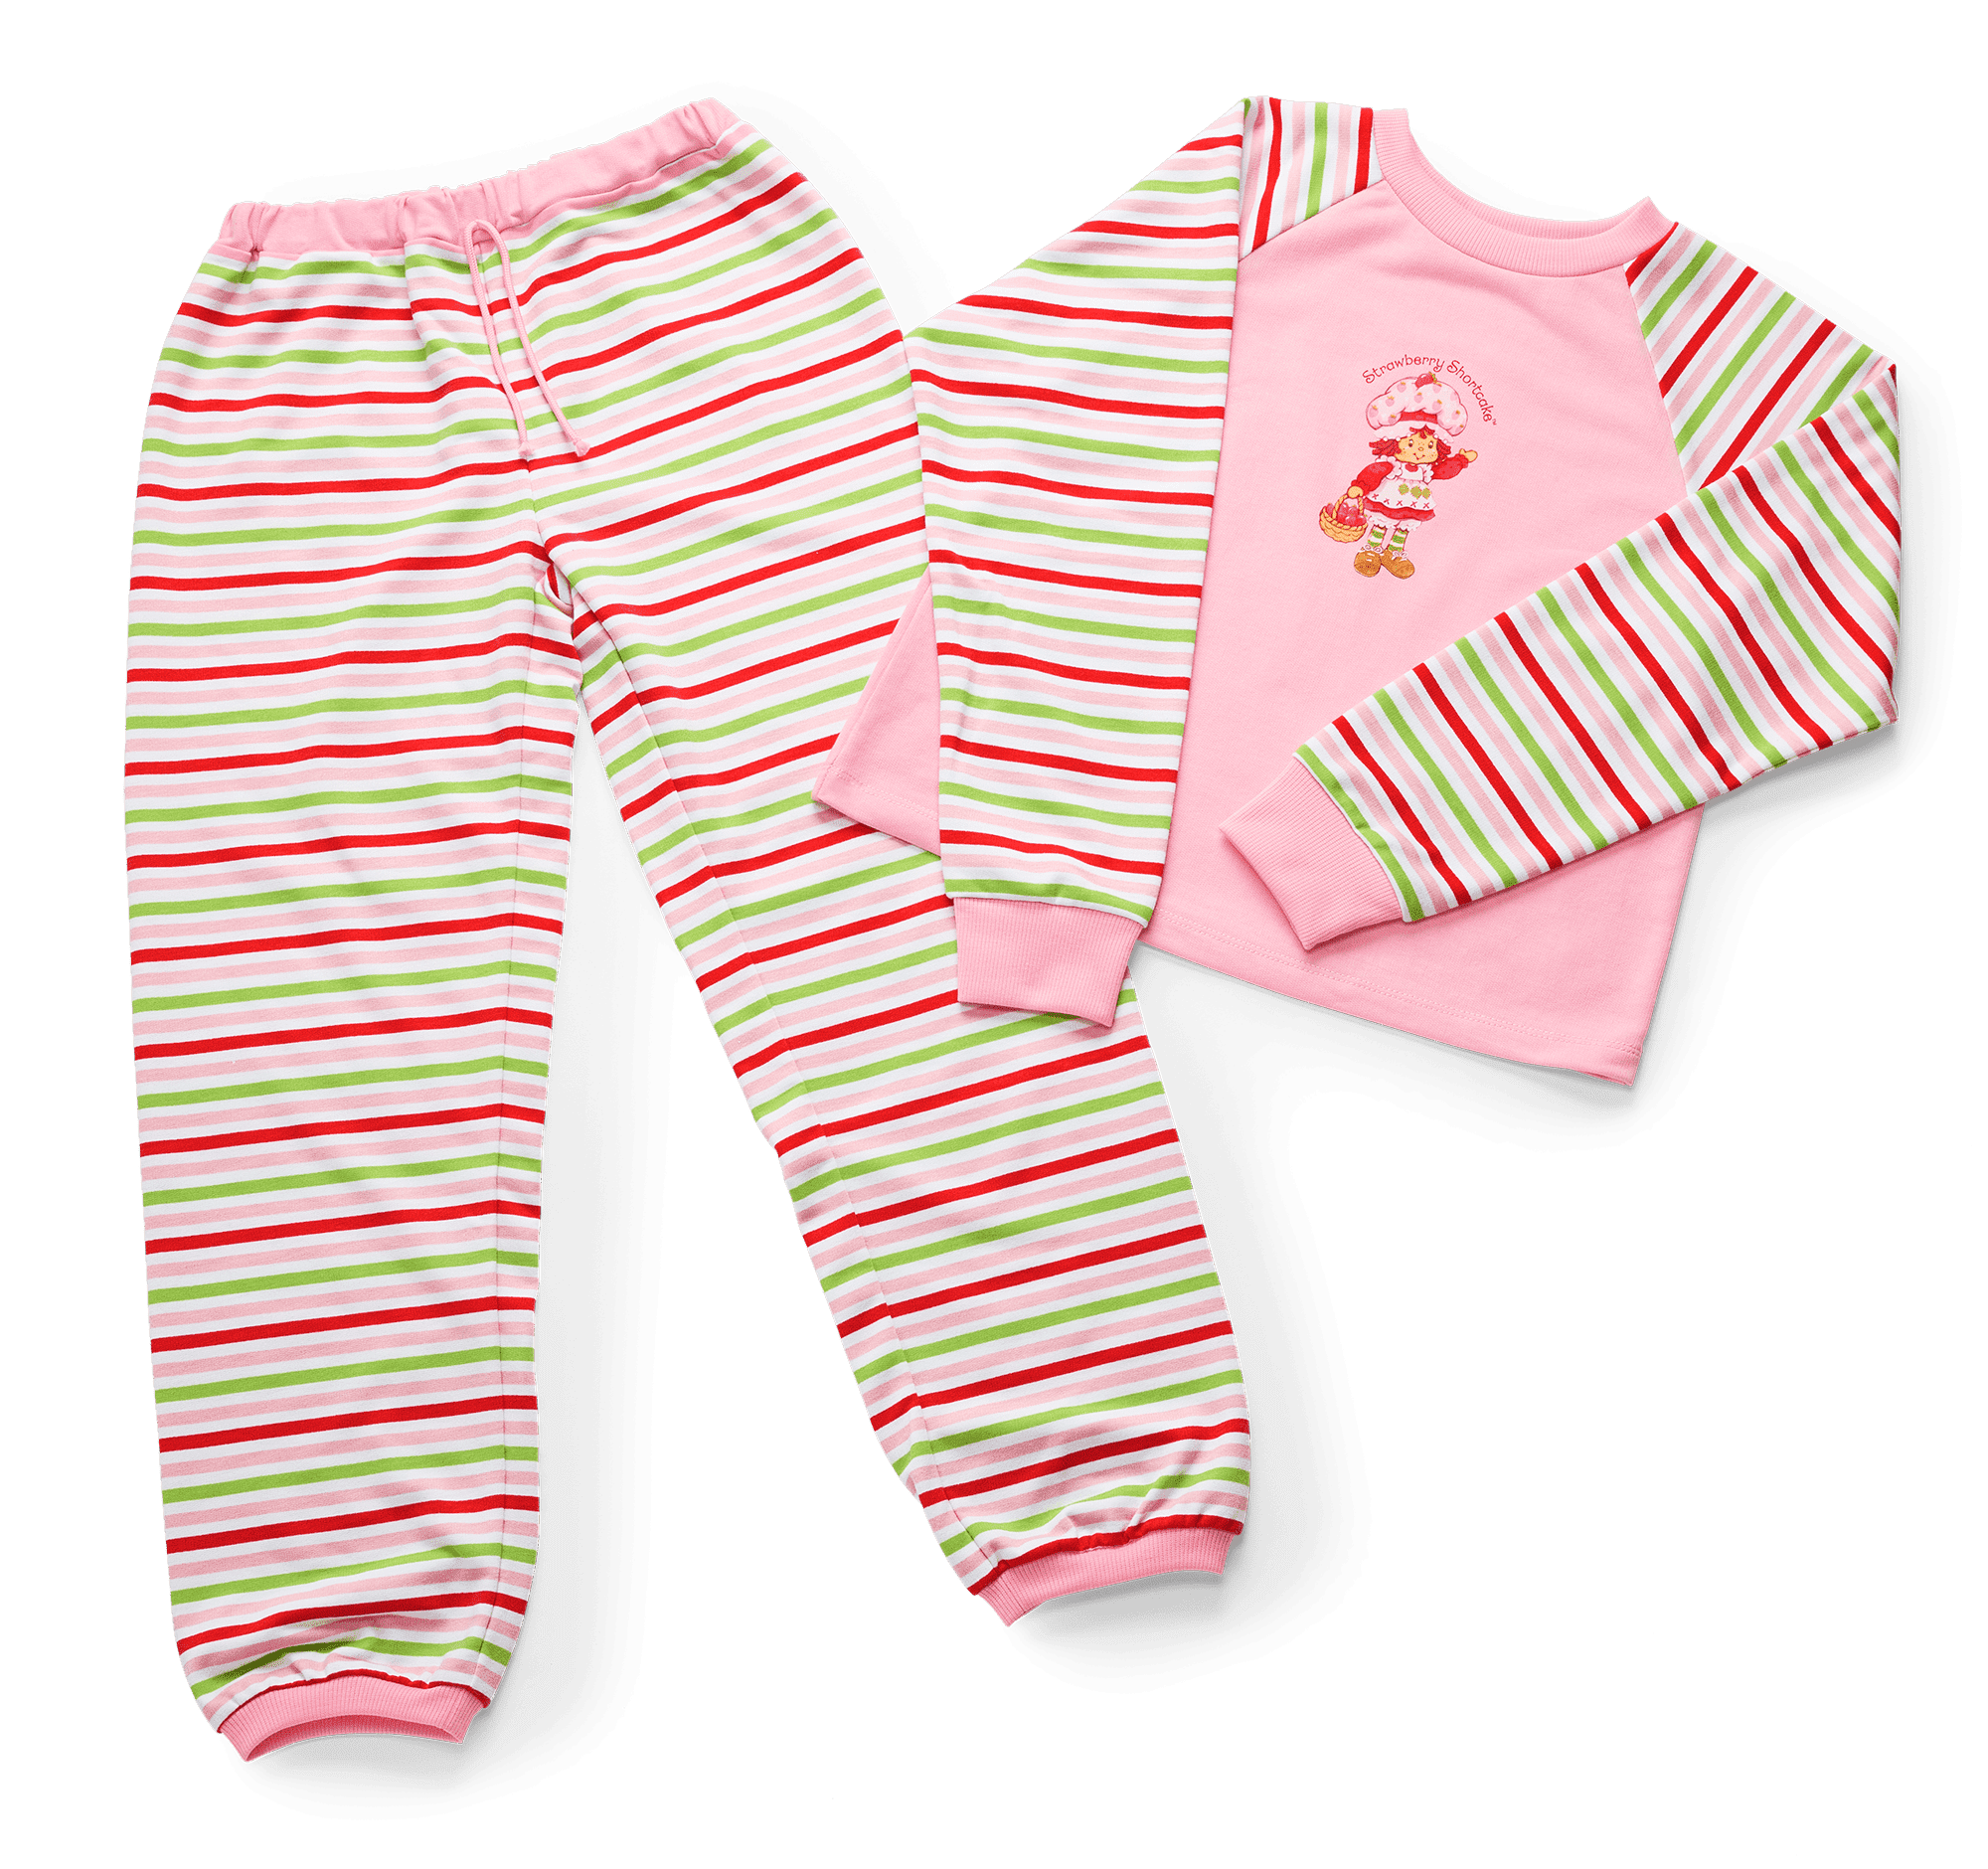 Courtney's™ Strawberry Shortcake™ Pajamas for Girls (Historical Characters)